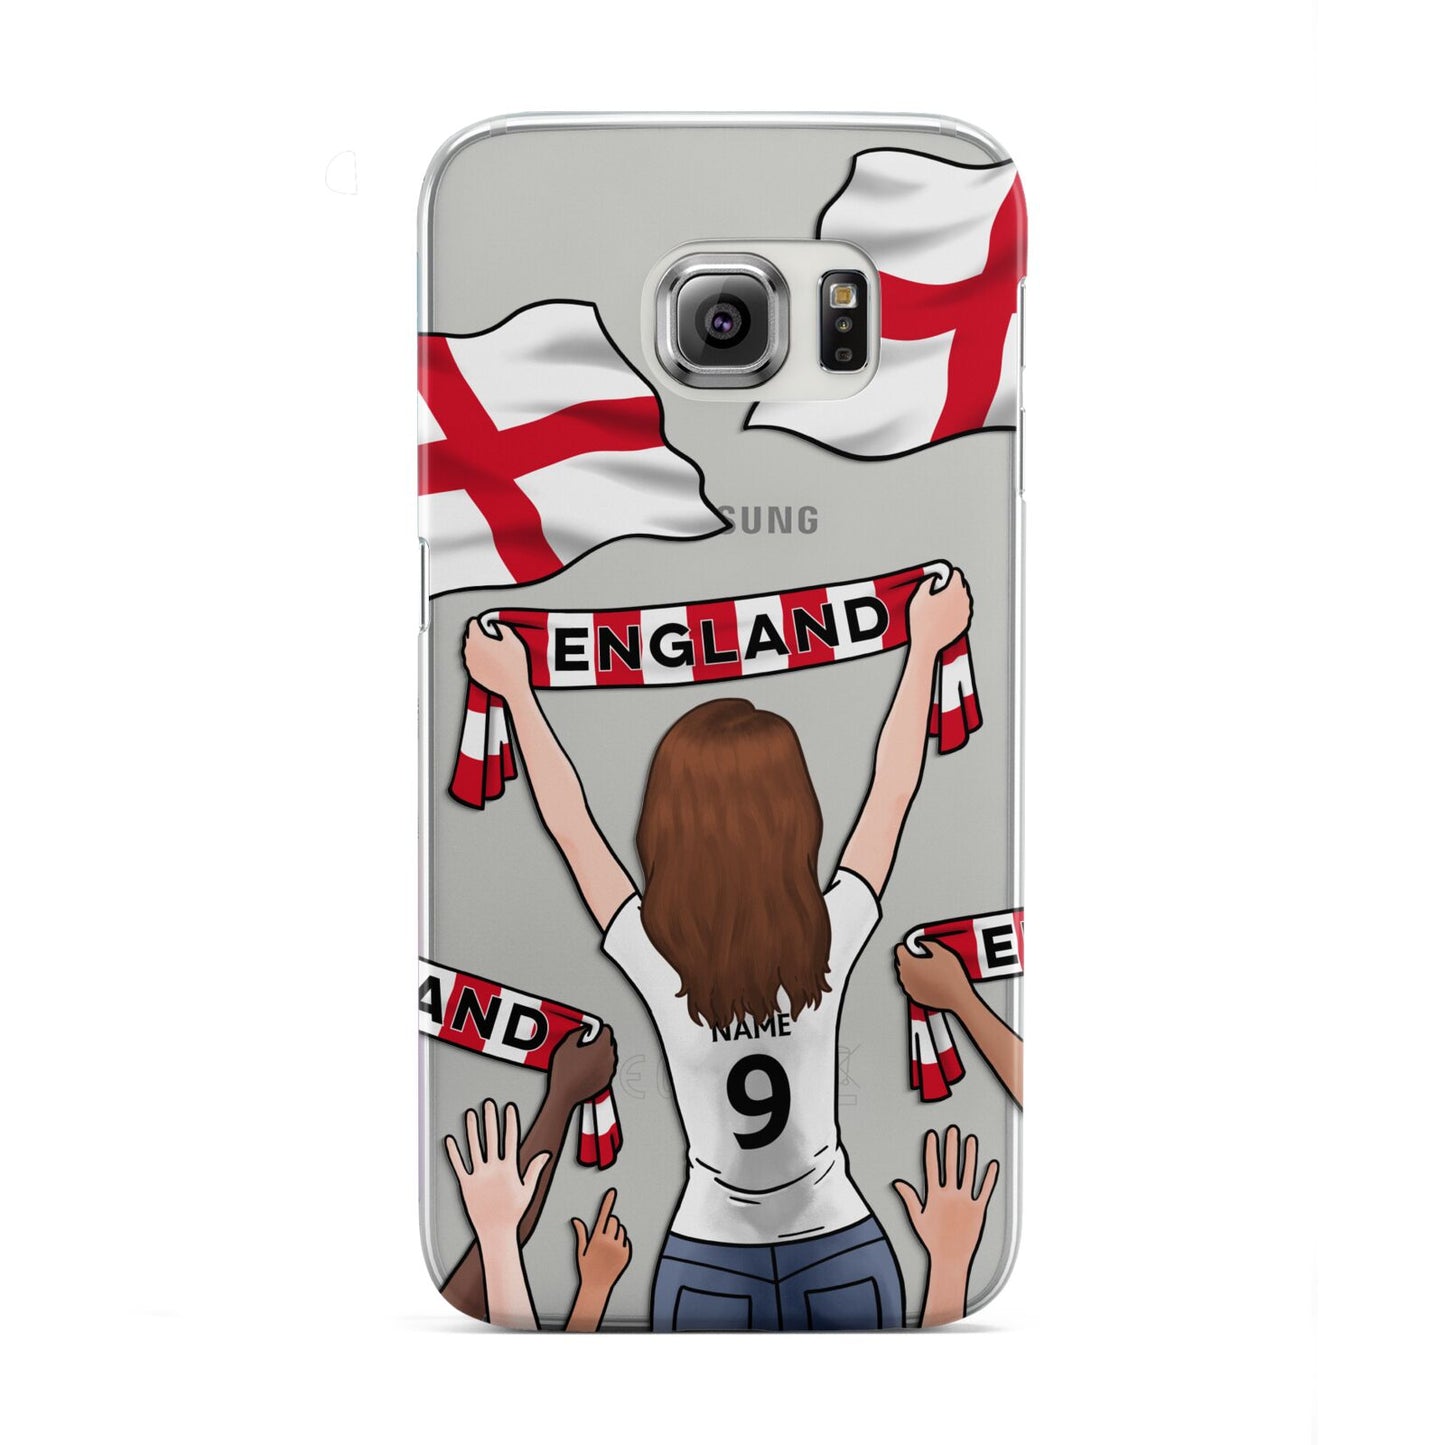 Football Supporter Personalised Samsung Galaxy S6 Edge Case